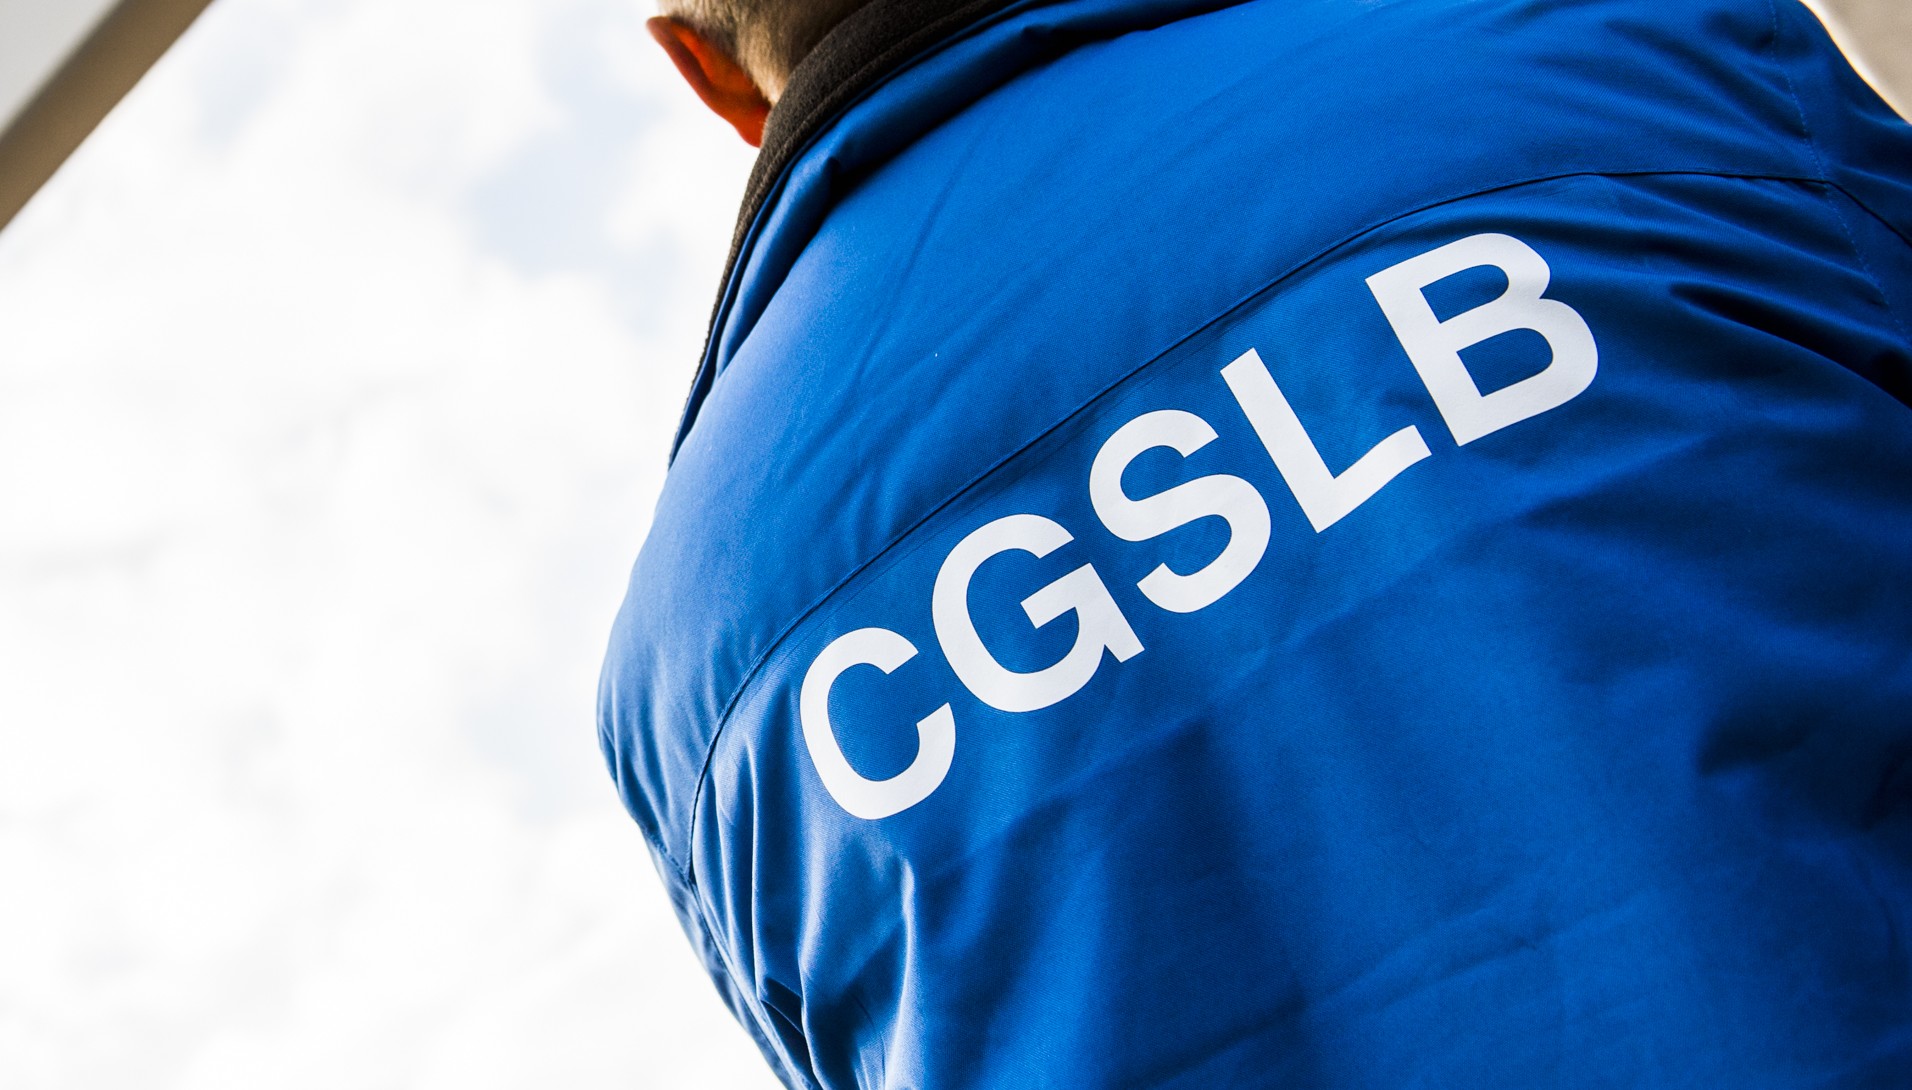 20150624 - BRUSSELS, BELGIUM: A man wearing CGSLB liberal union vest pictured ahead of an extraordinary works council (Conseil d'entreprise - ondernemingsraad) of Delhaize group, Wednesday 24 June 2015 in Brussels. They will discuss the future of the group with the possible consolidation with Dutch group Ahold and their supermarket Albert Heijn. BELGA PHOTO LAURIE DIEFFEMBACQ